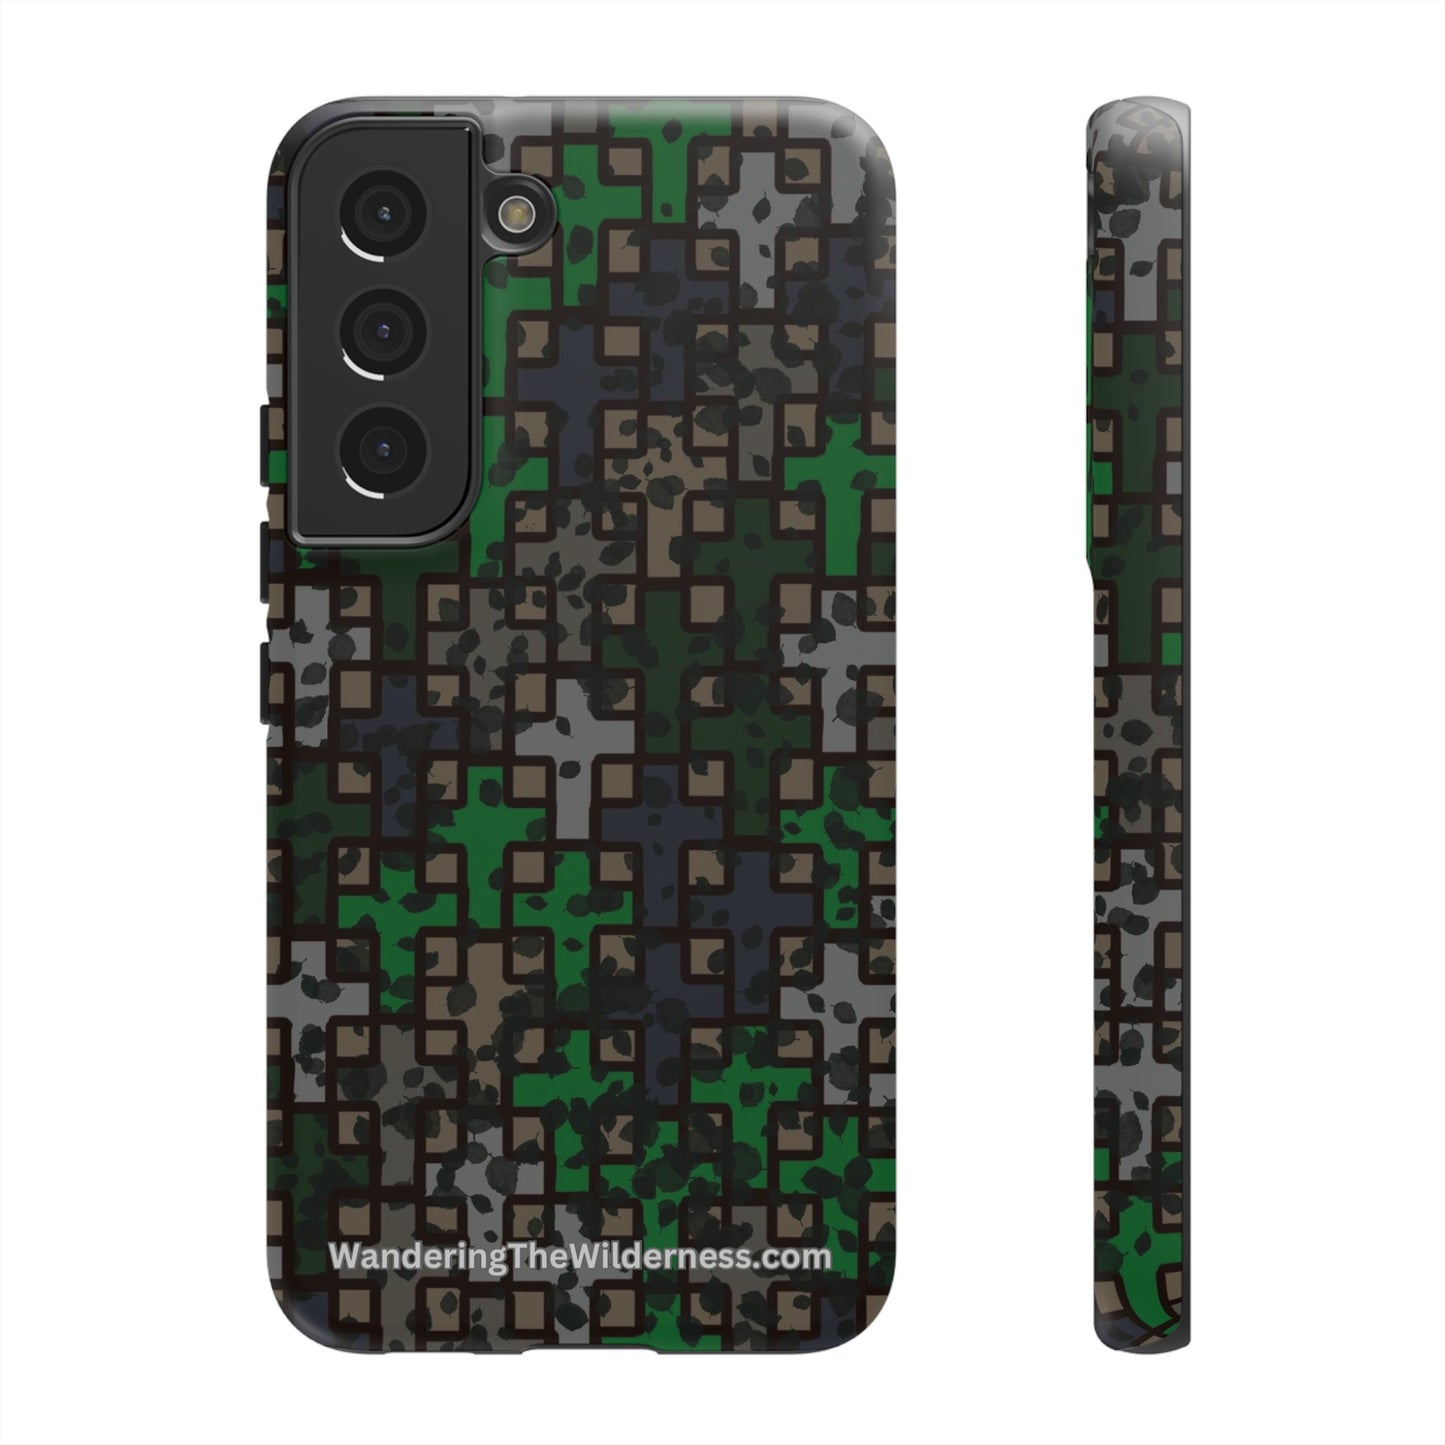 Wandering the Wilderness Mossback Camo Tough Cases